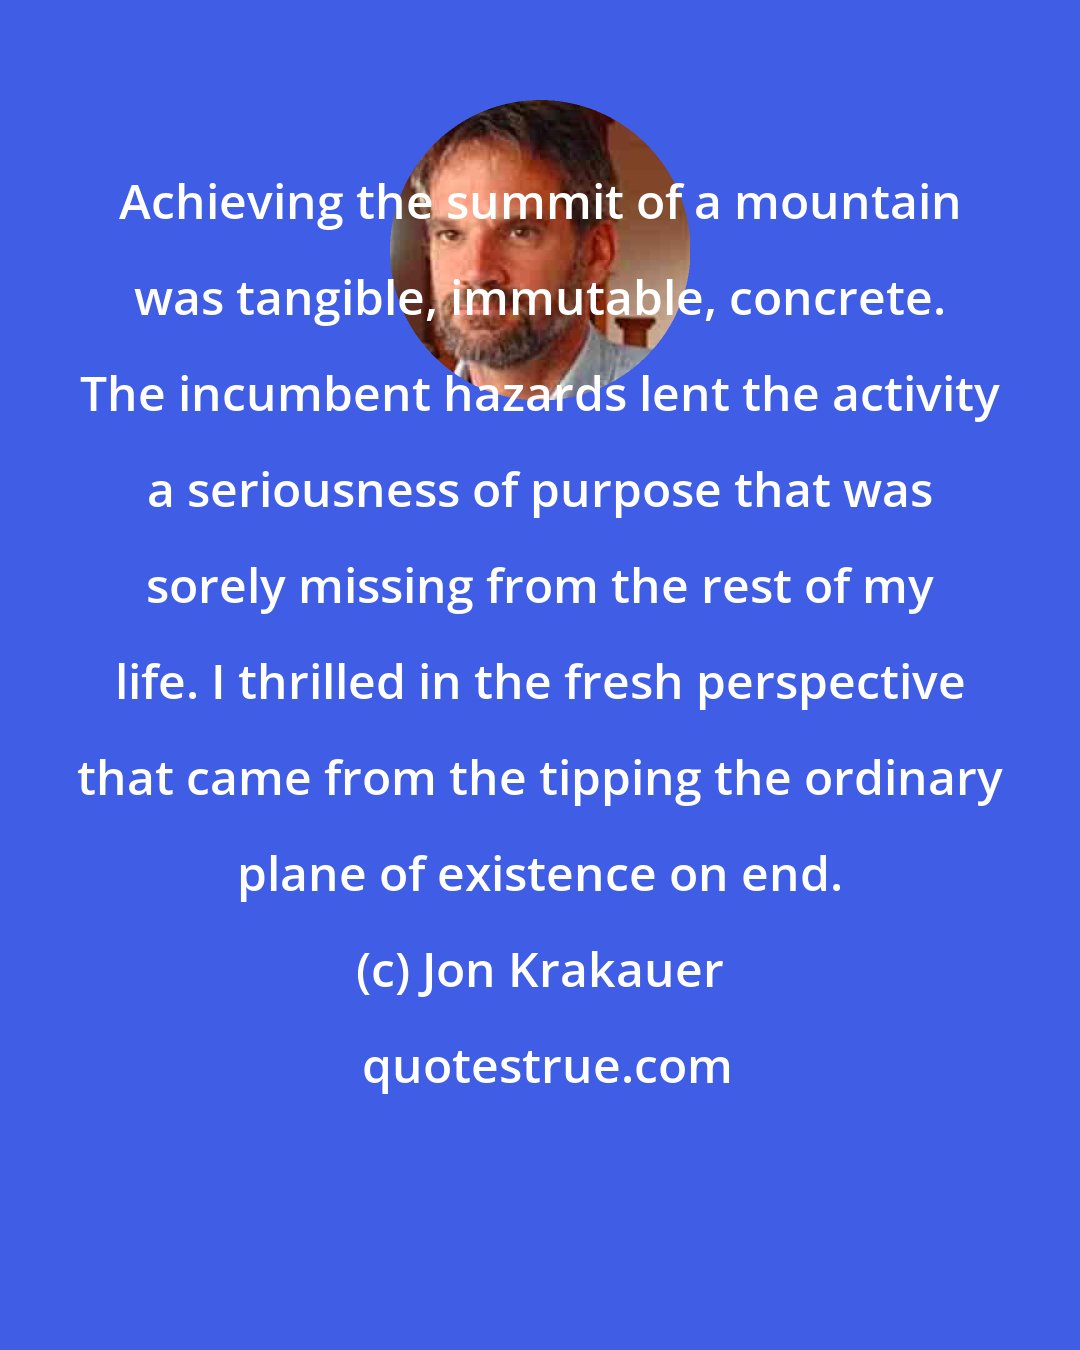 Jon Krakauer: Achieving the summit of a mountain was tangible, immutable, concrete. The incumbent hazards lent the activity a seriousness of purpose that was sorely missing from the rest of my life. I thrilled in the fresh perspective that came from the tipping the ordinary plane of existence on end.